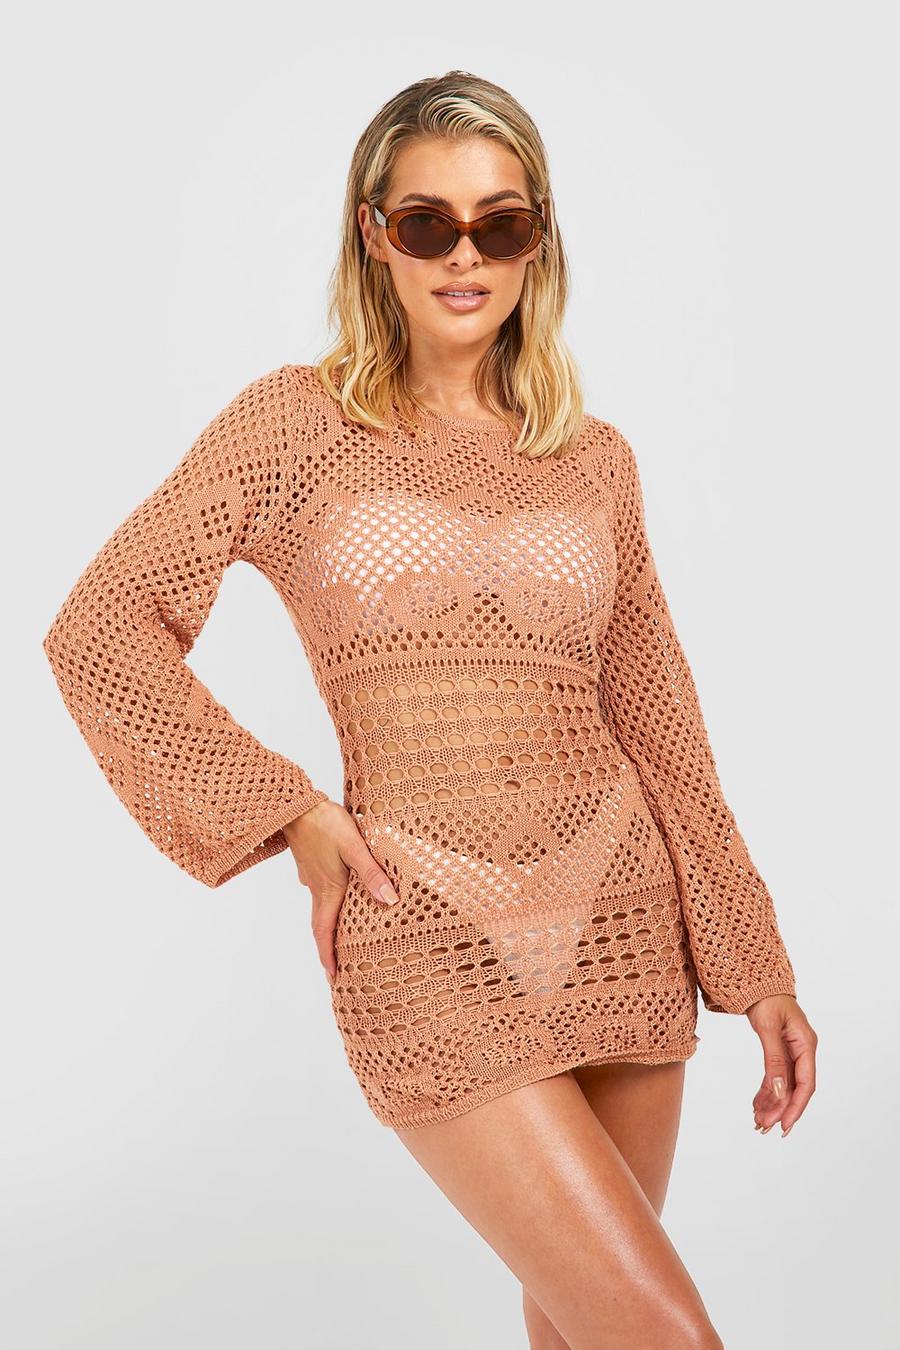 Nude Recycled Crochet Cover Up Beach Dress